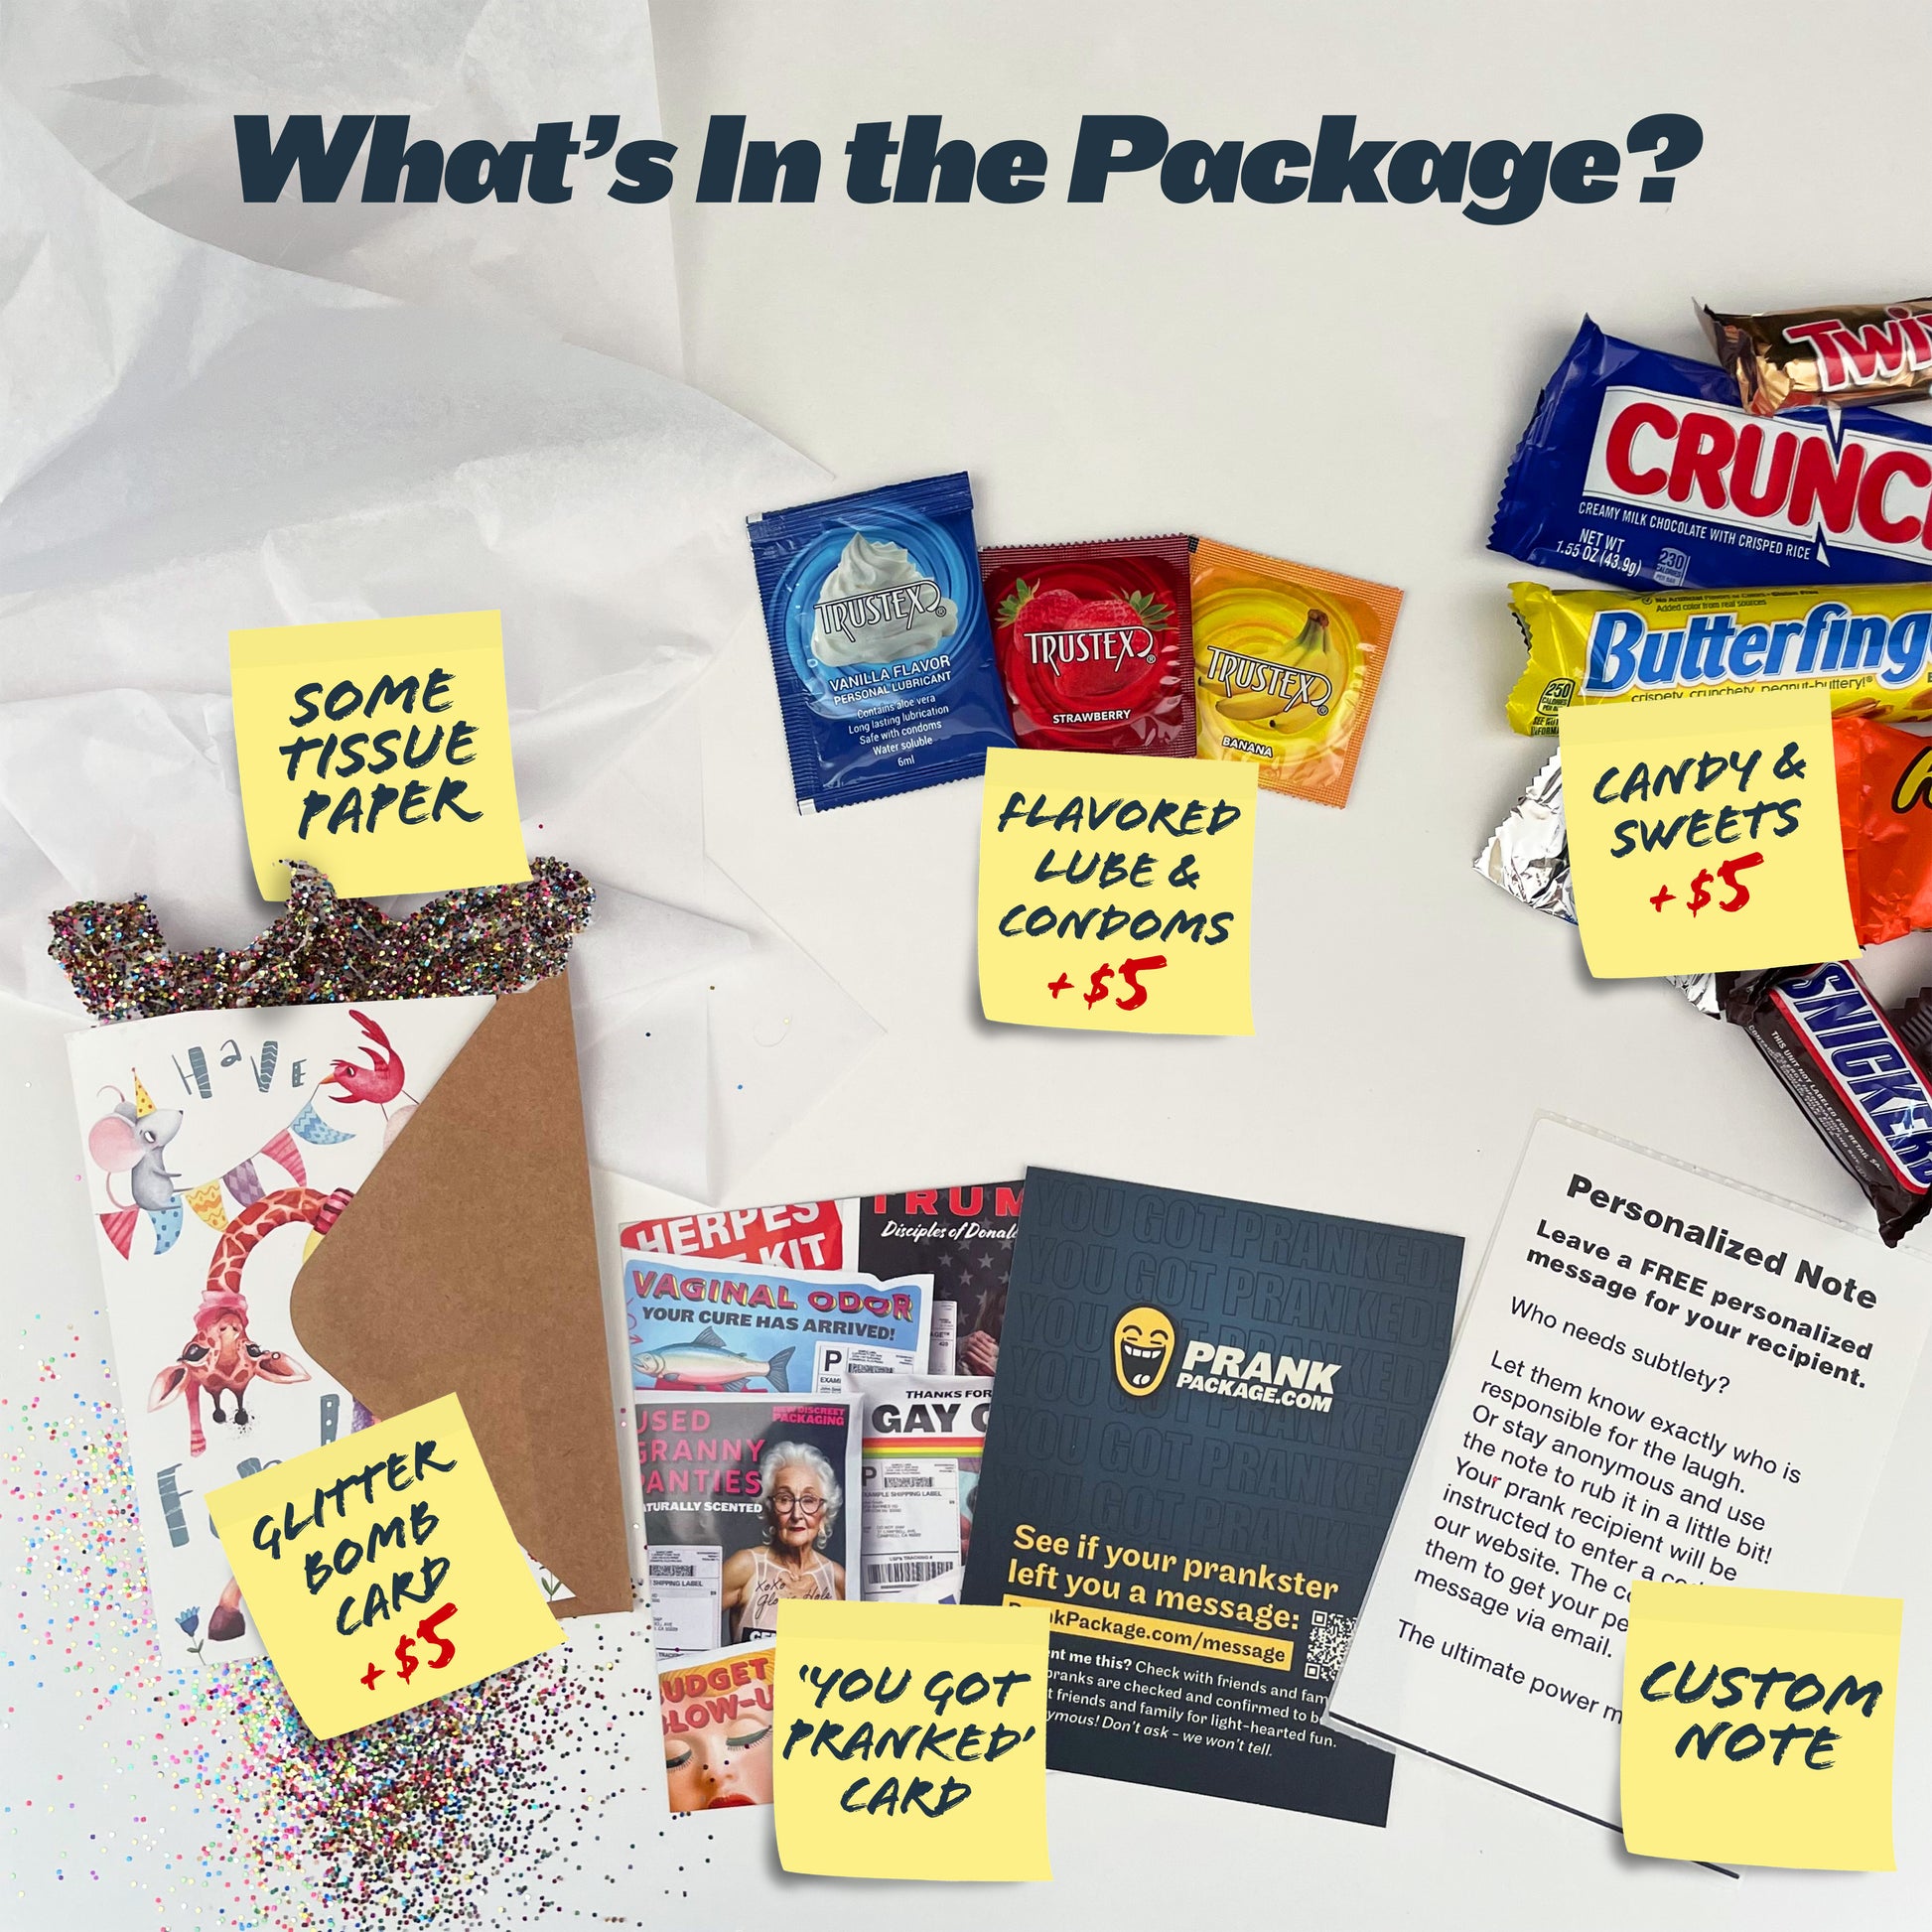 What's included in the prank package? Some tissue paper, an optional personalized note, a 'You Got Pranked' card, optional candy for $5 extra, and optional flavored condoms & lube for $5 extra.